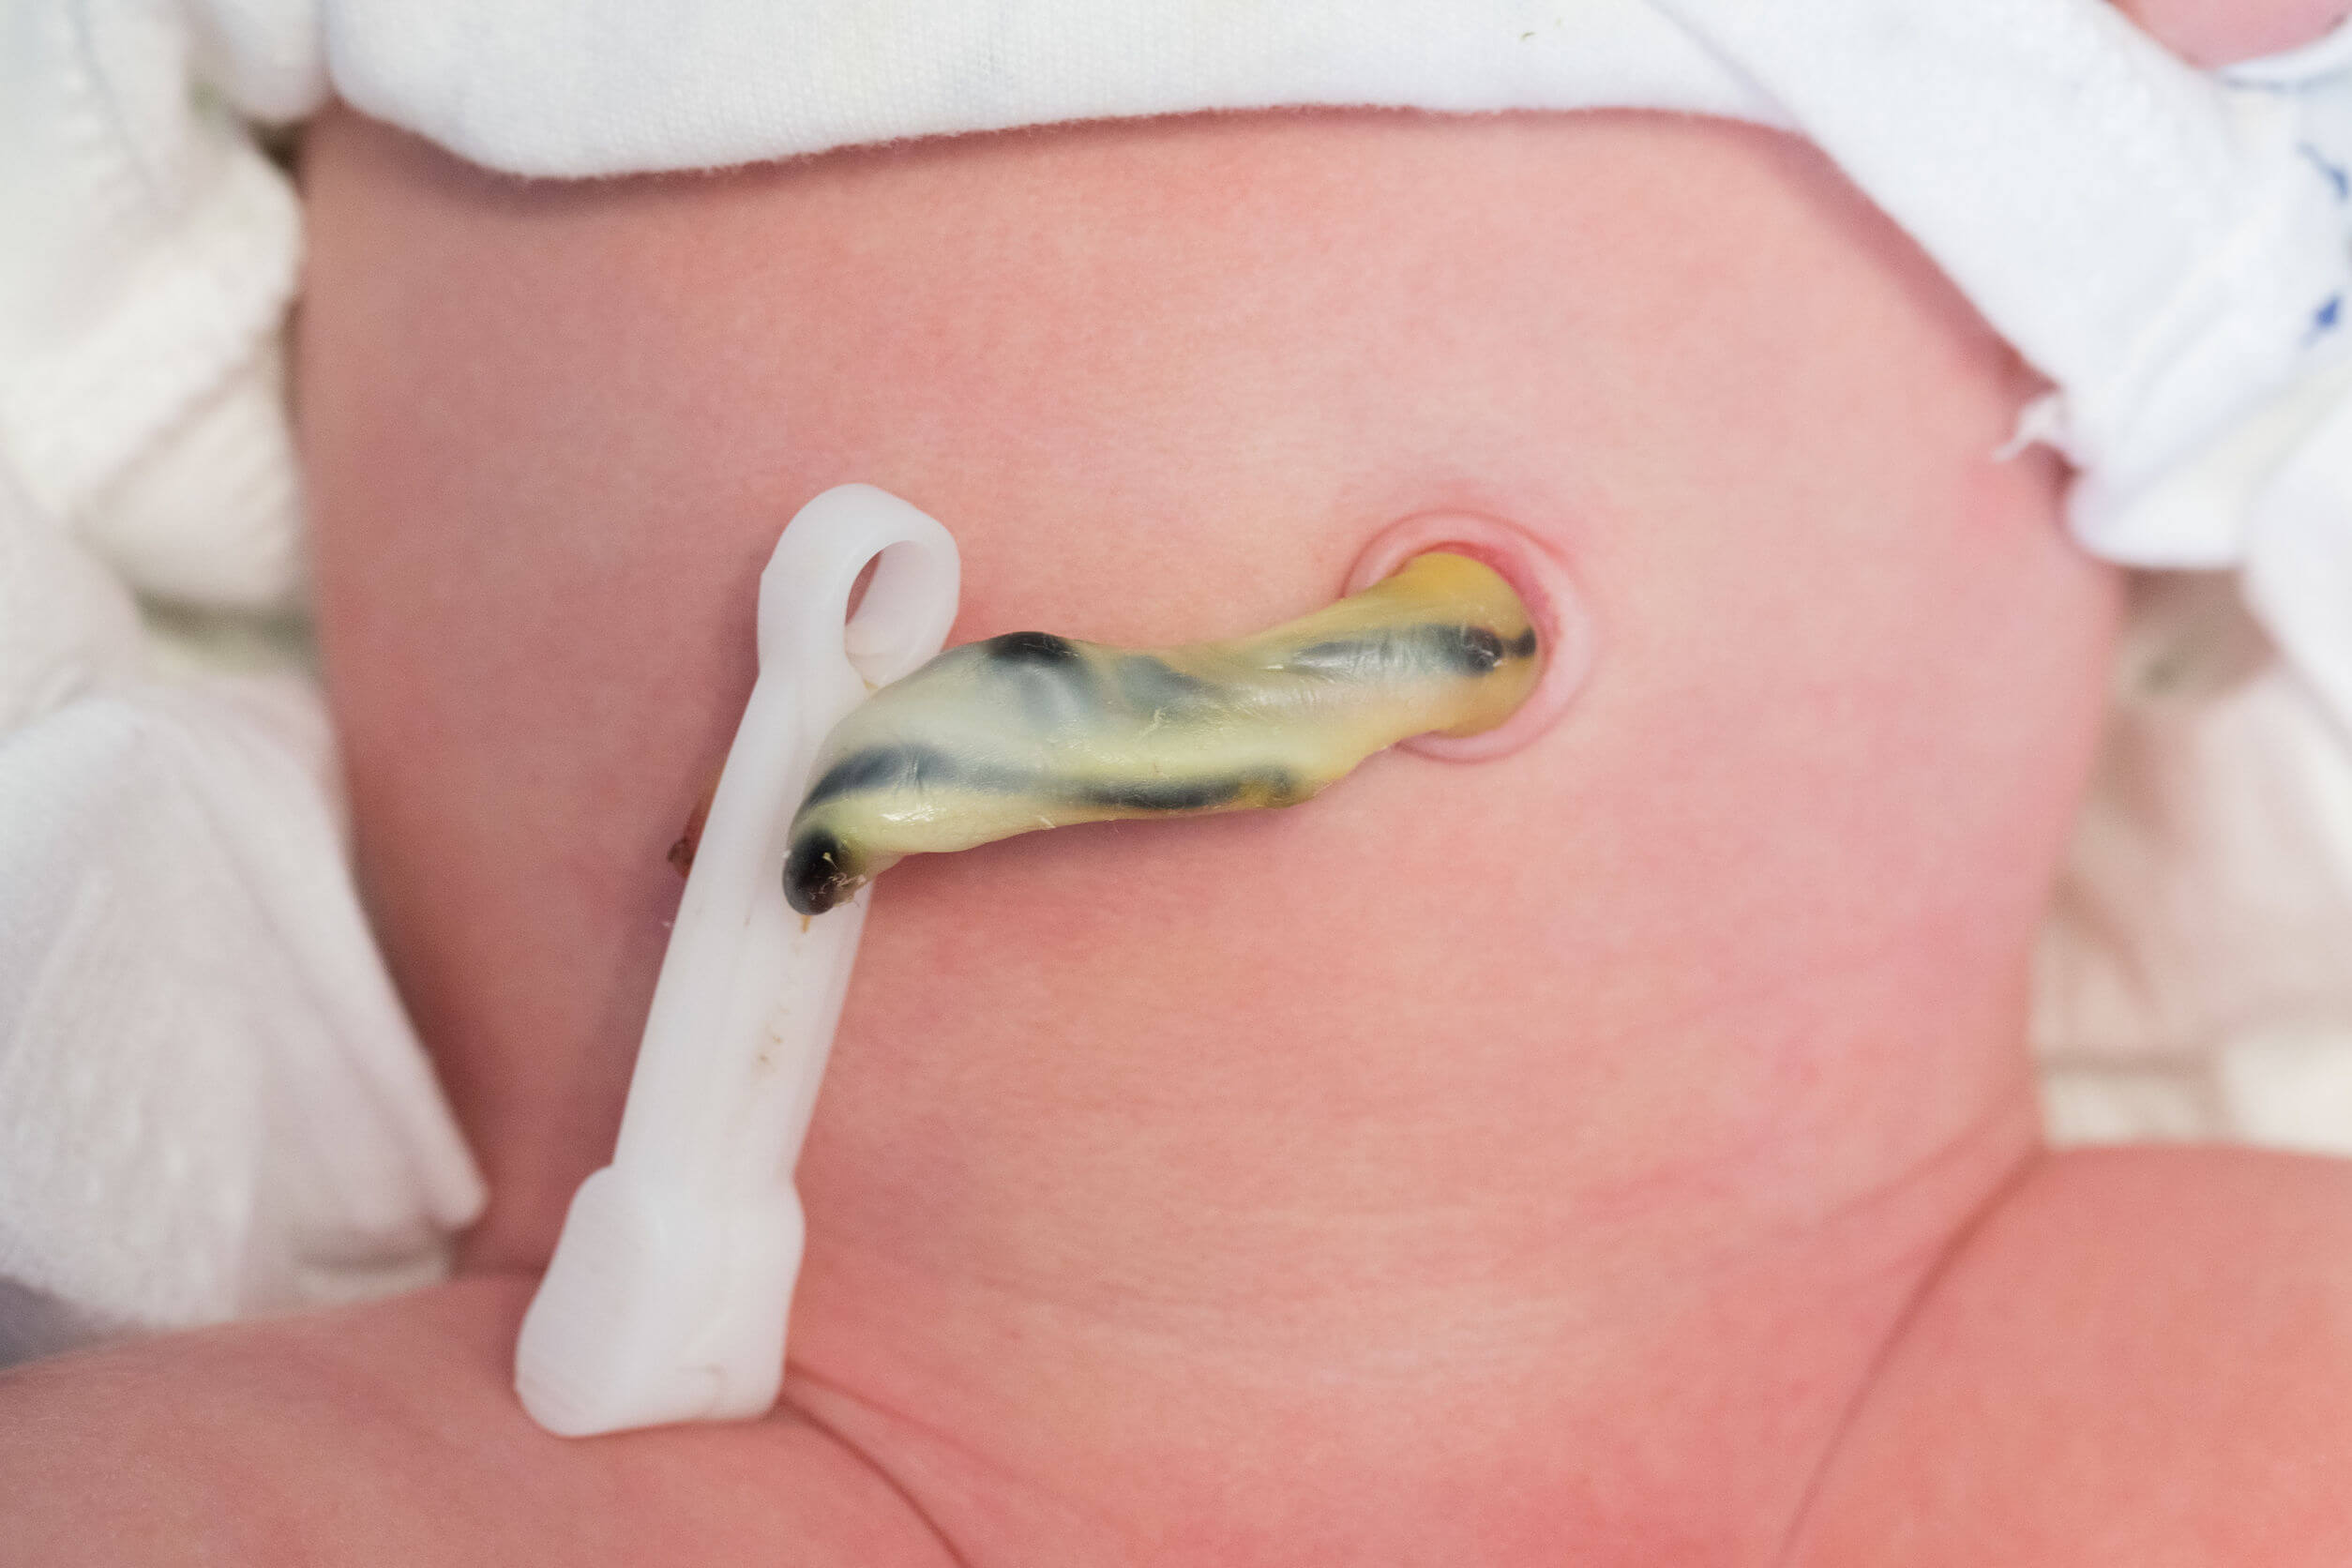 Infected umbilical cord is common.